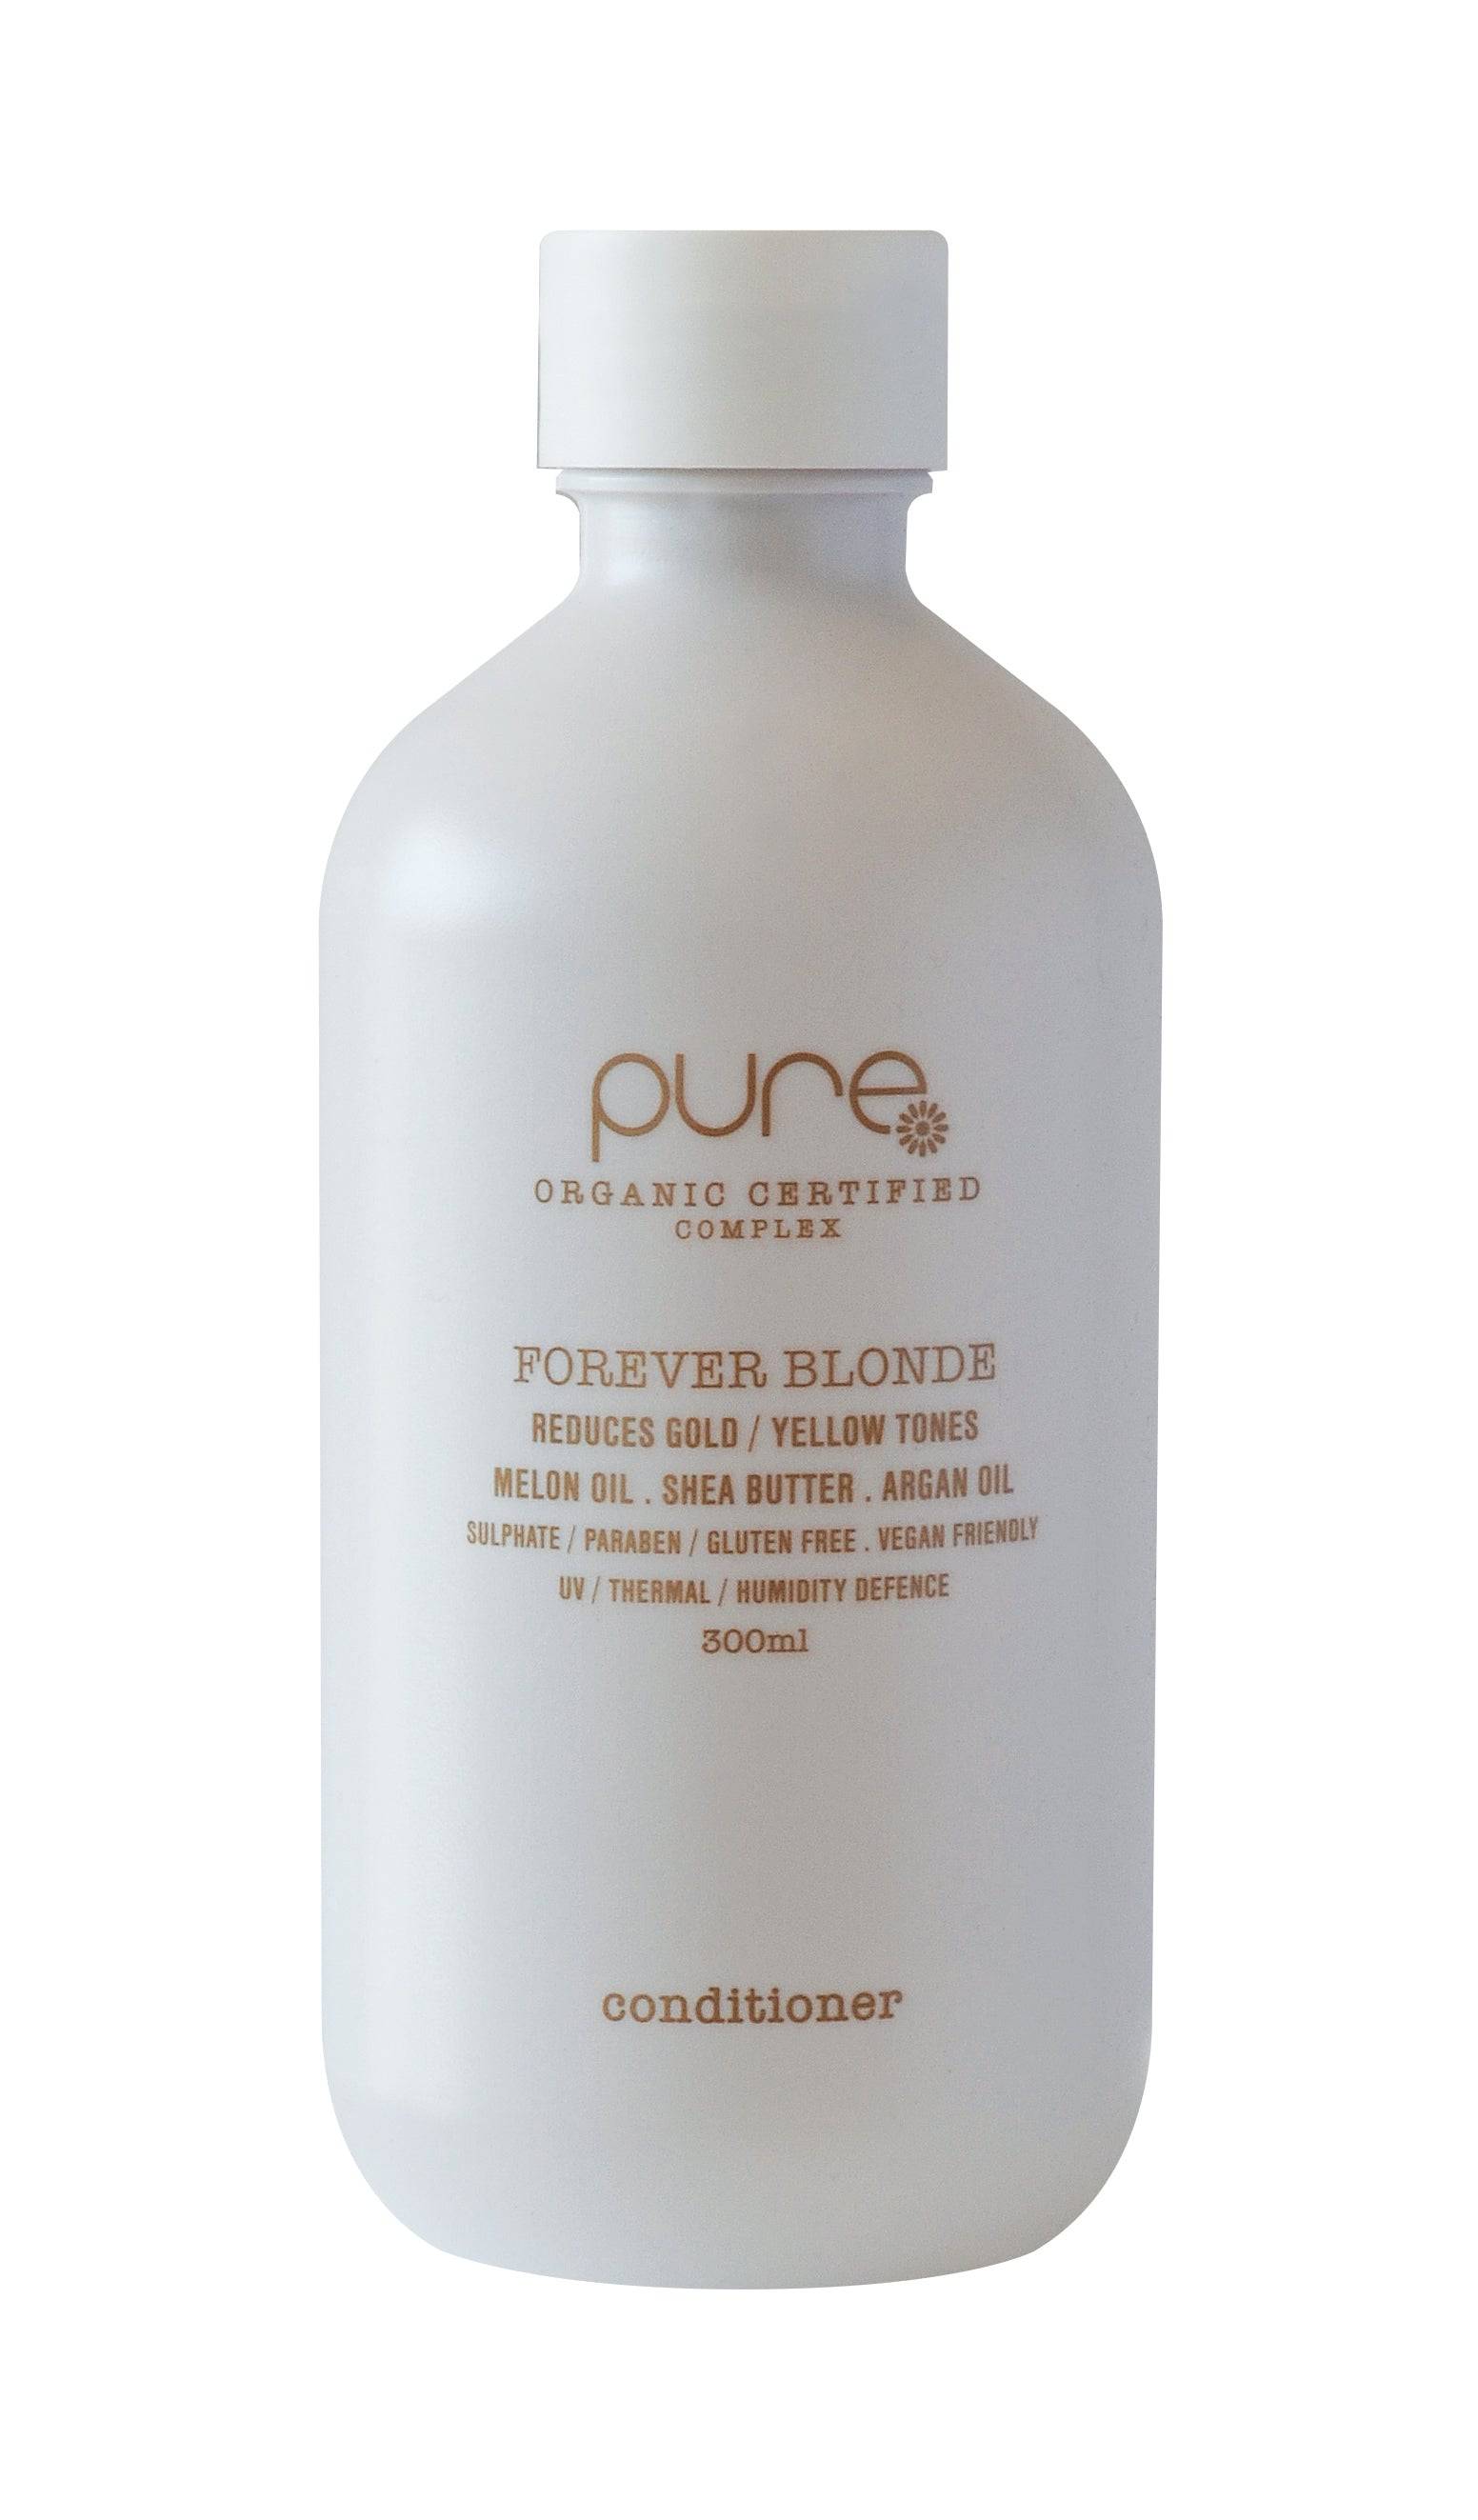 Pure Forever Blonde Conditioner 300ml - On Line Hair Depot